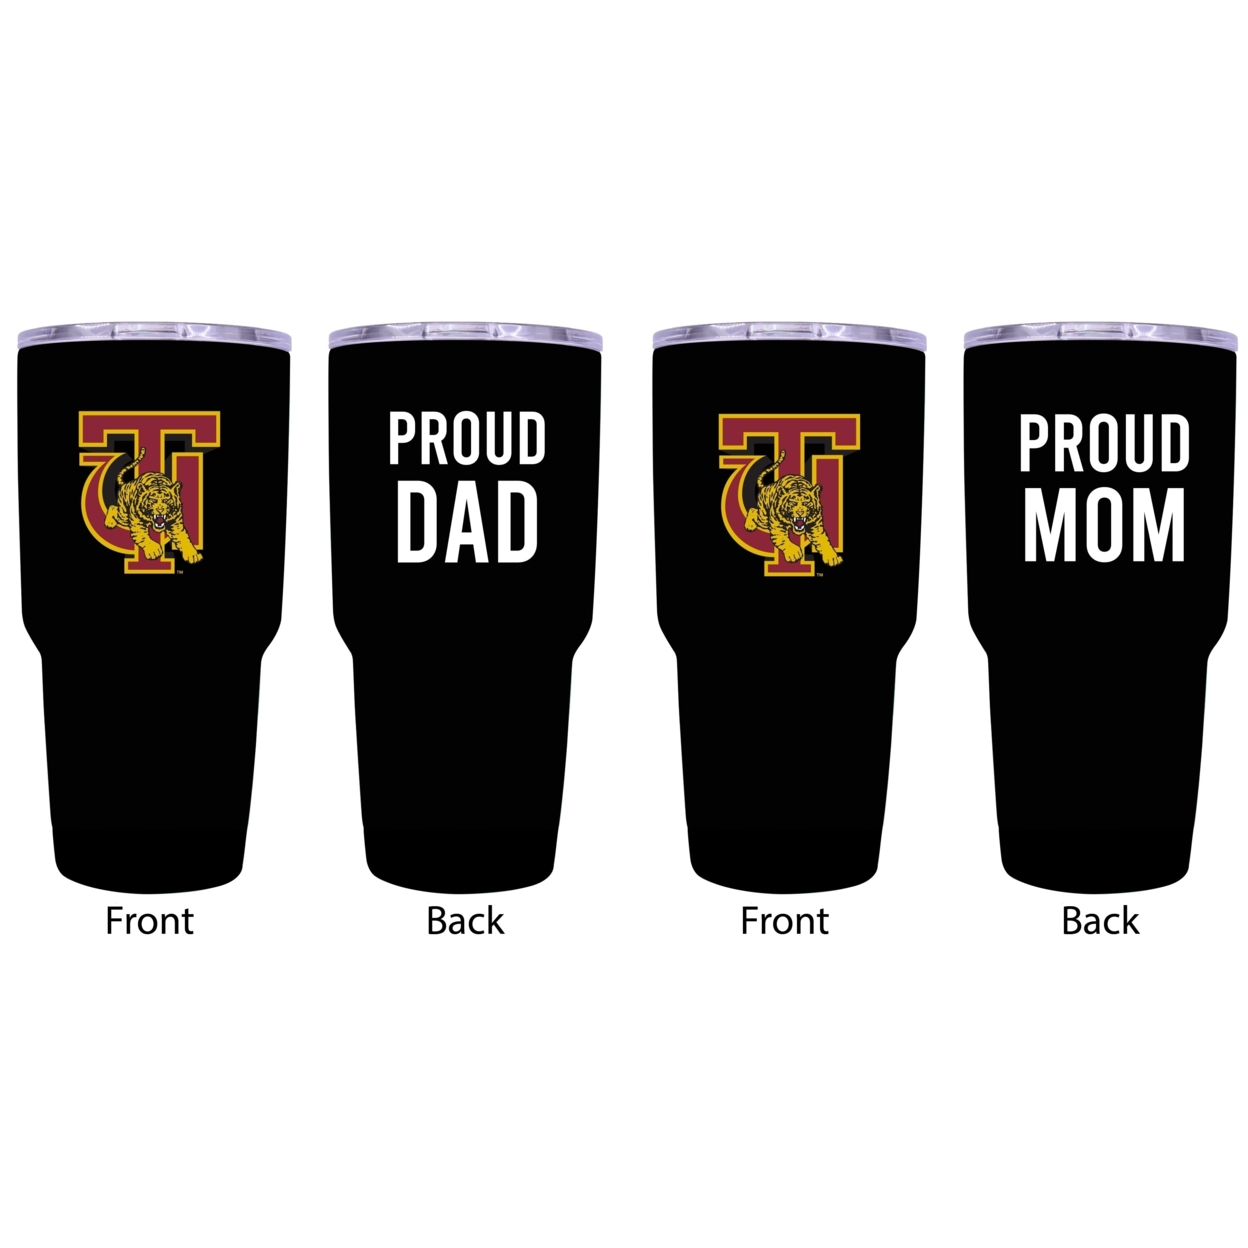 Tuskegee University Proud Mom And Dad 24 Oz Insulated Stainless Steel Tumblers 2 Pack Black.